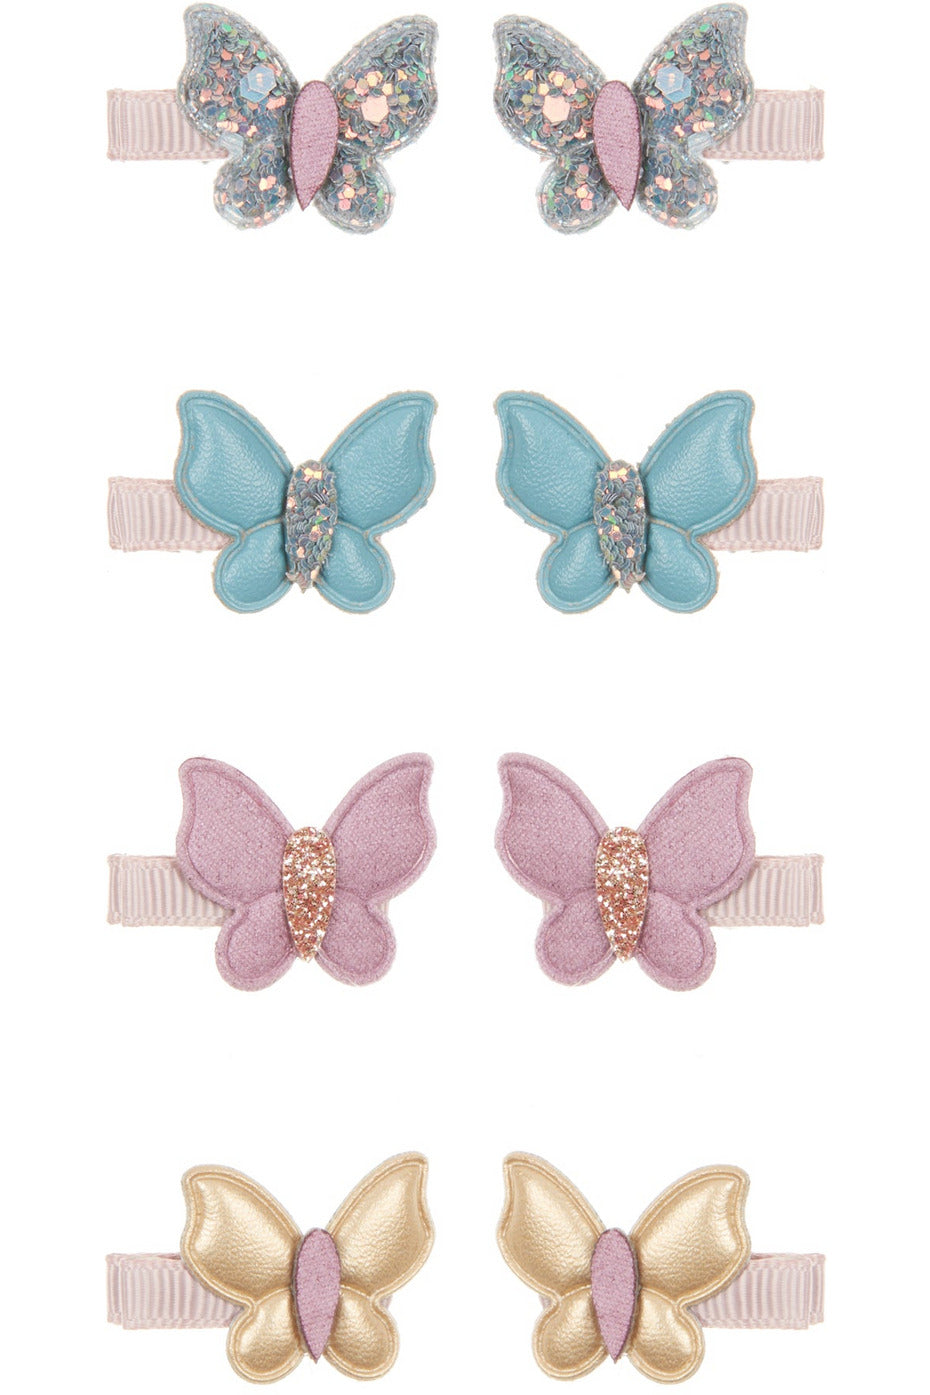 ENCHANTED WOODLAND Butterfly Mini Clips